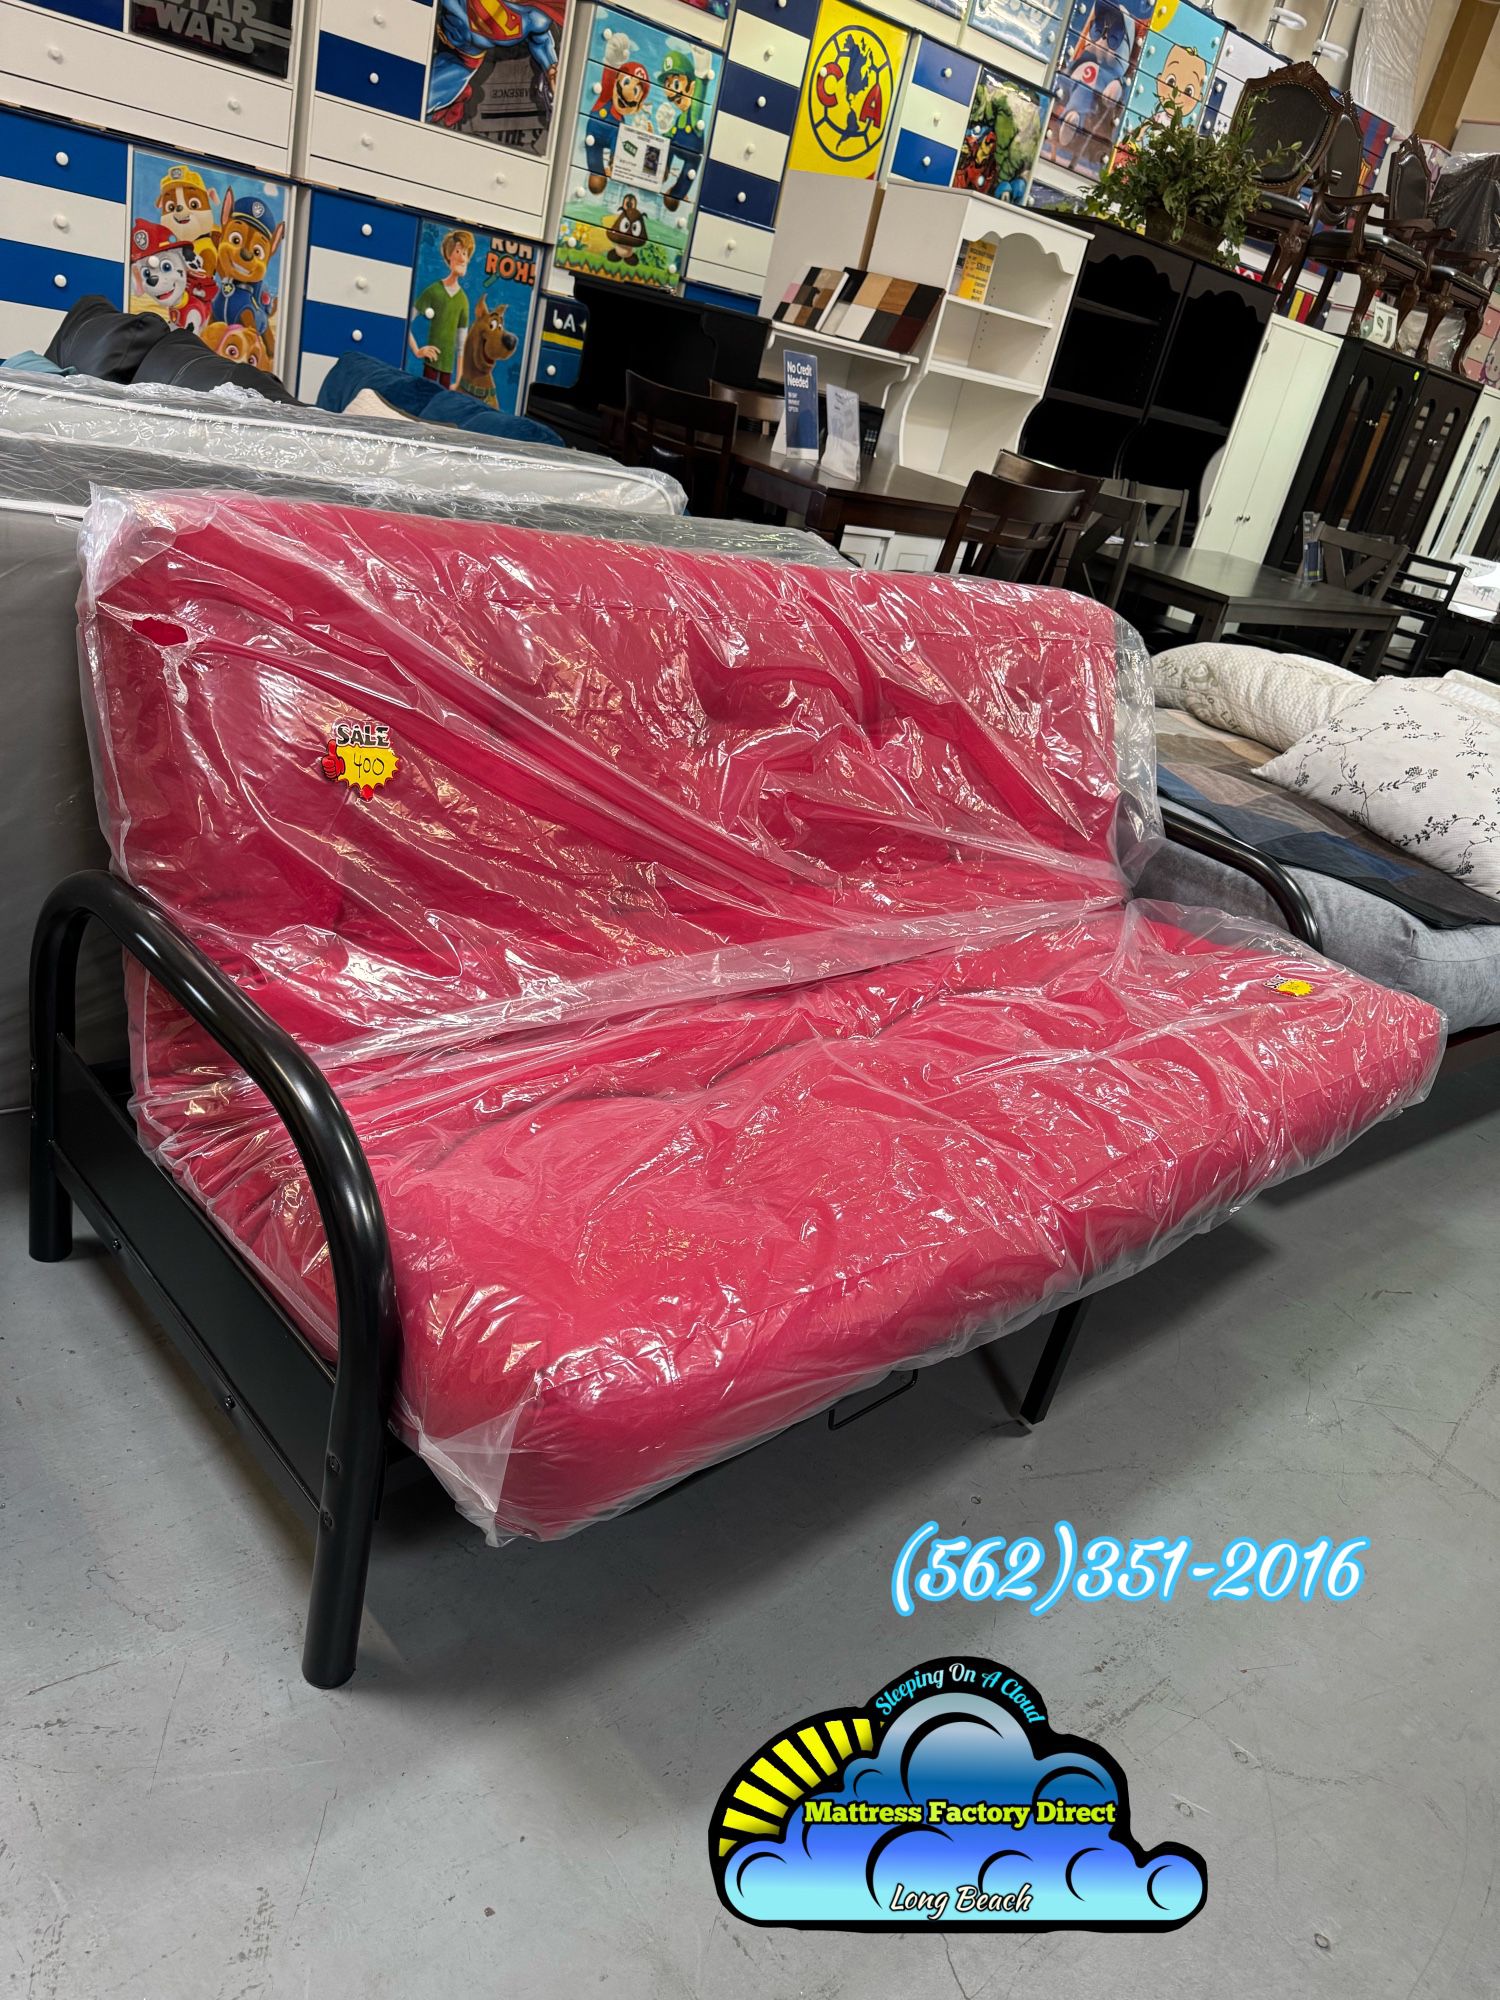 Futon Couch Bed Red Sofa 